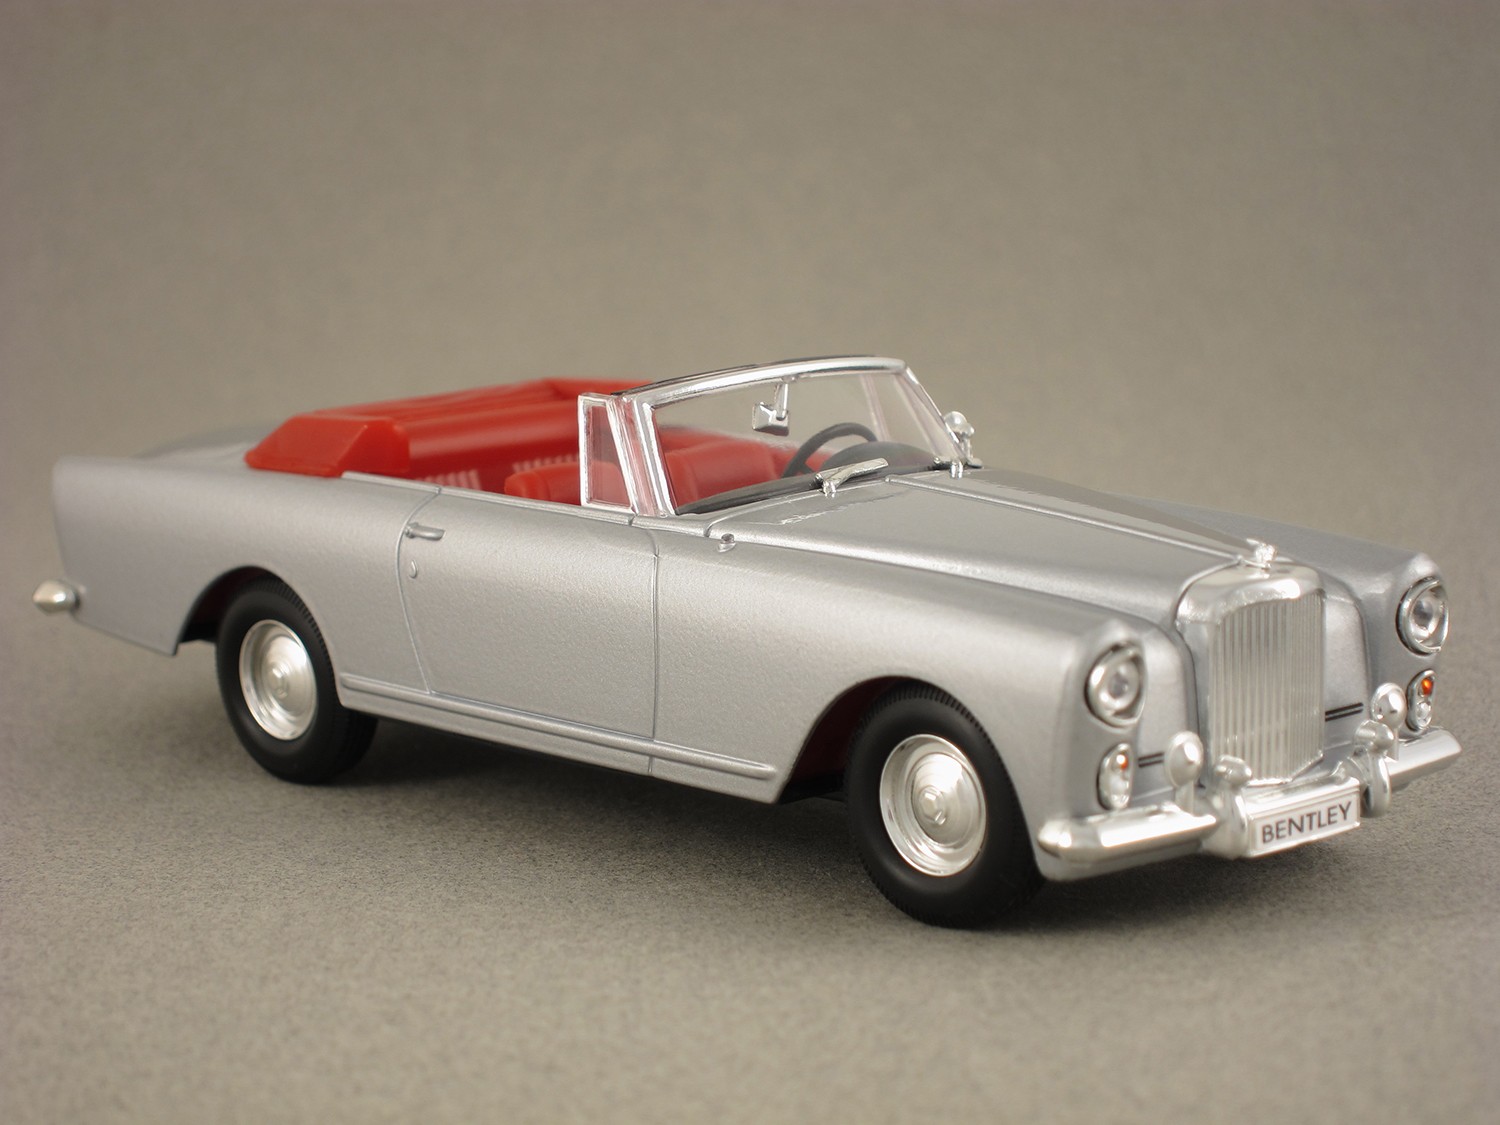 Bentley Continental S2 Drophead Coupe (Yat Ming) 1/43e